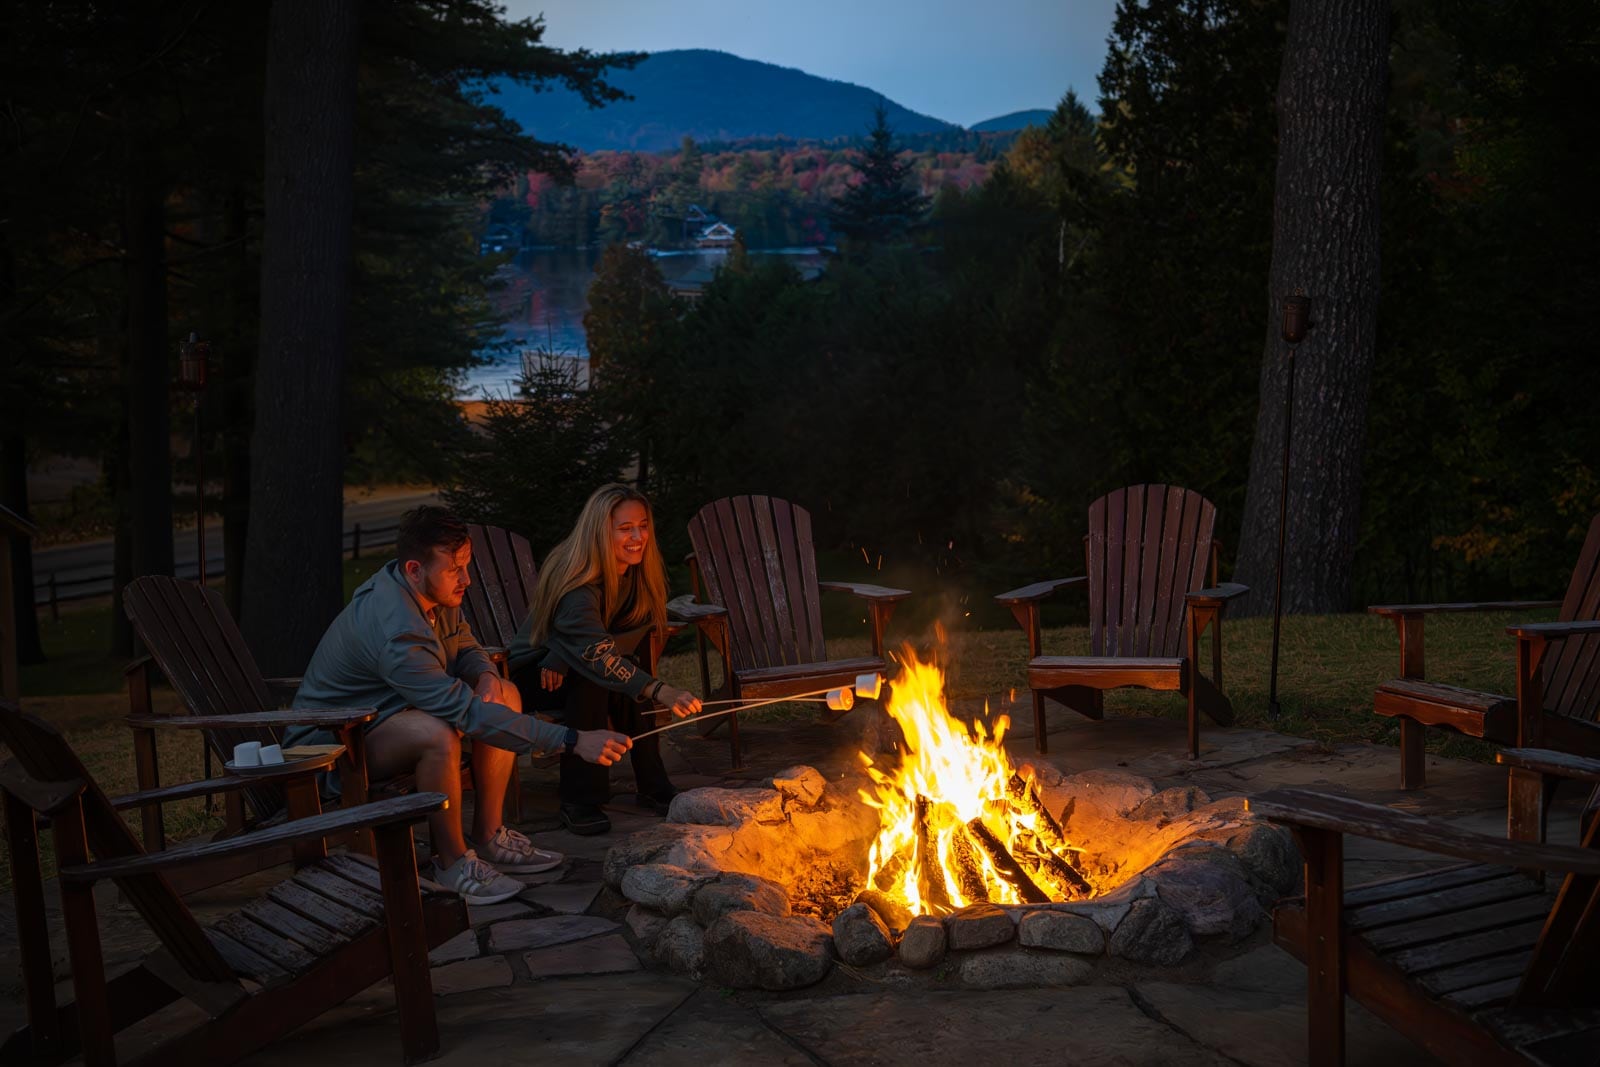 Two people sitting around a fire pit at dusk.